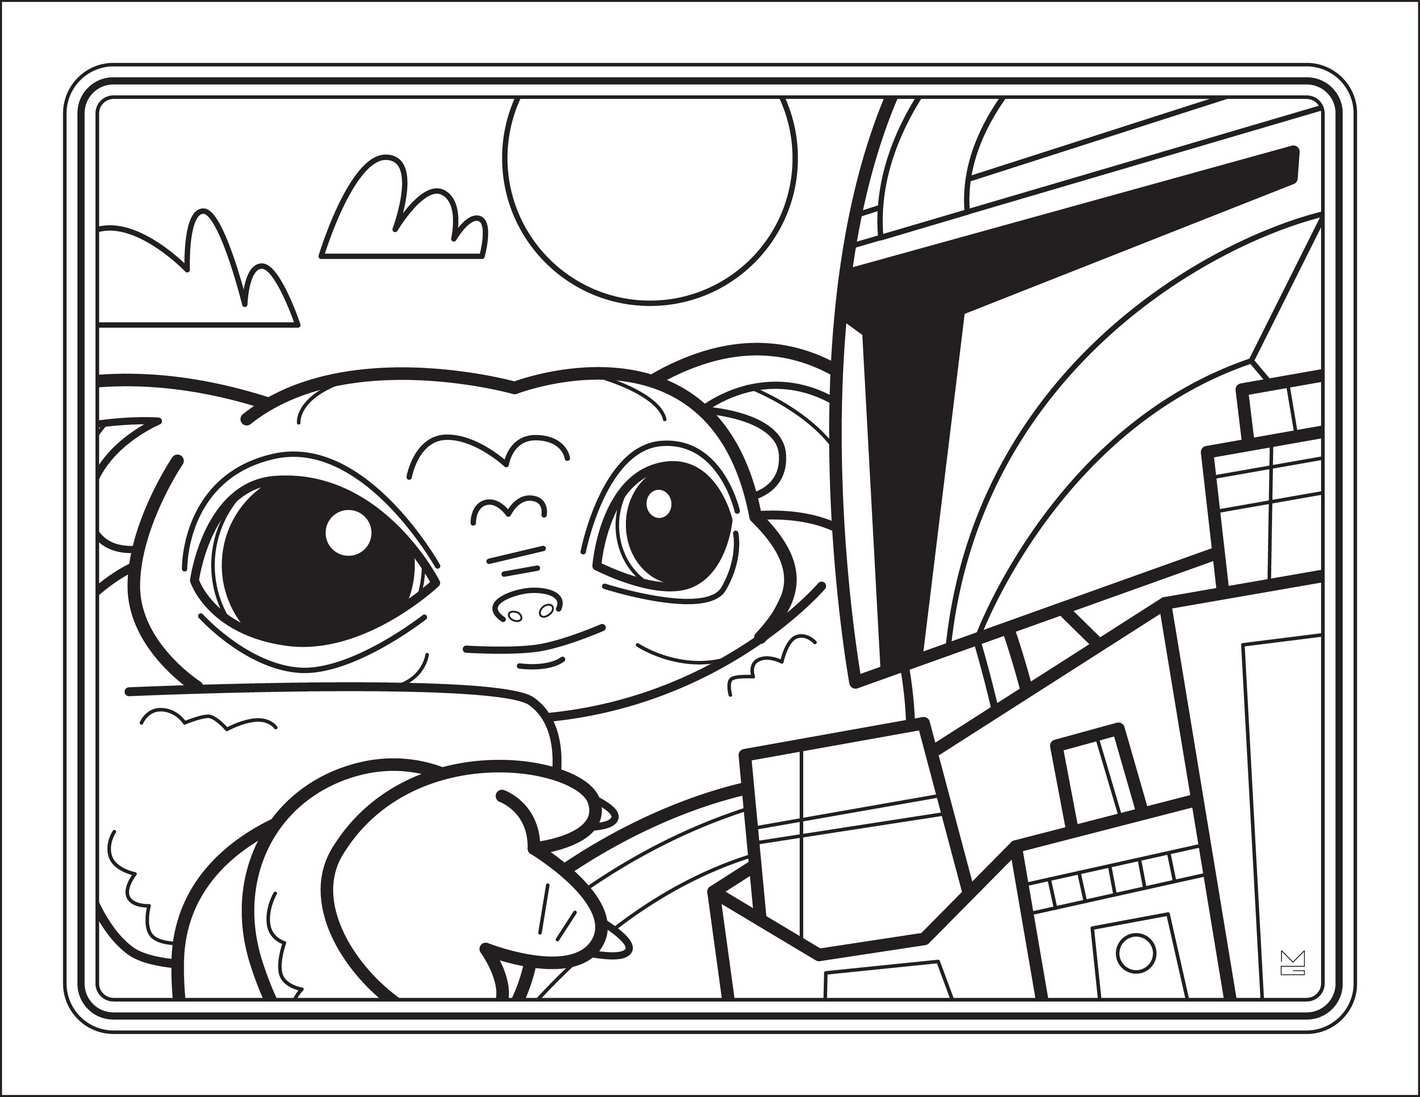 You Can Get a Free Downloadable “Baby Yoda” Coloring Book